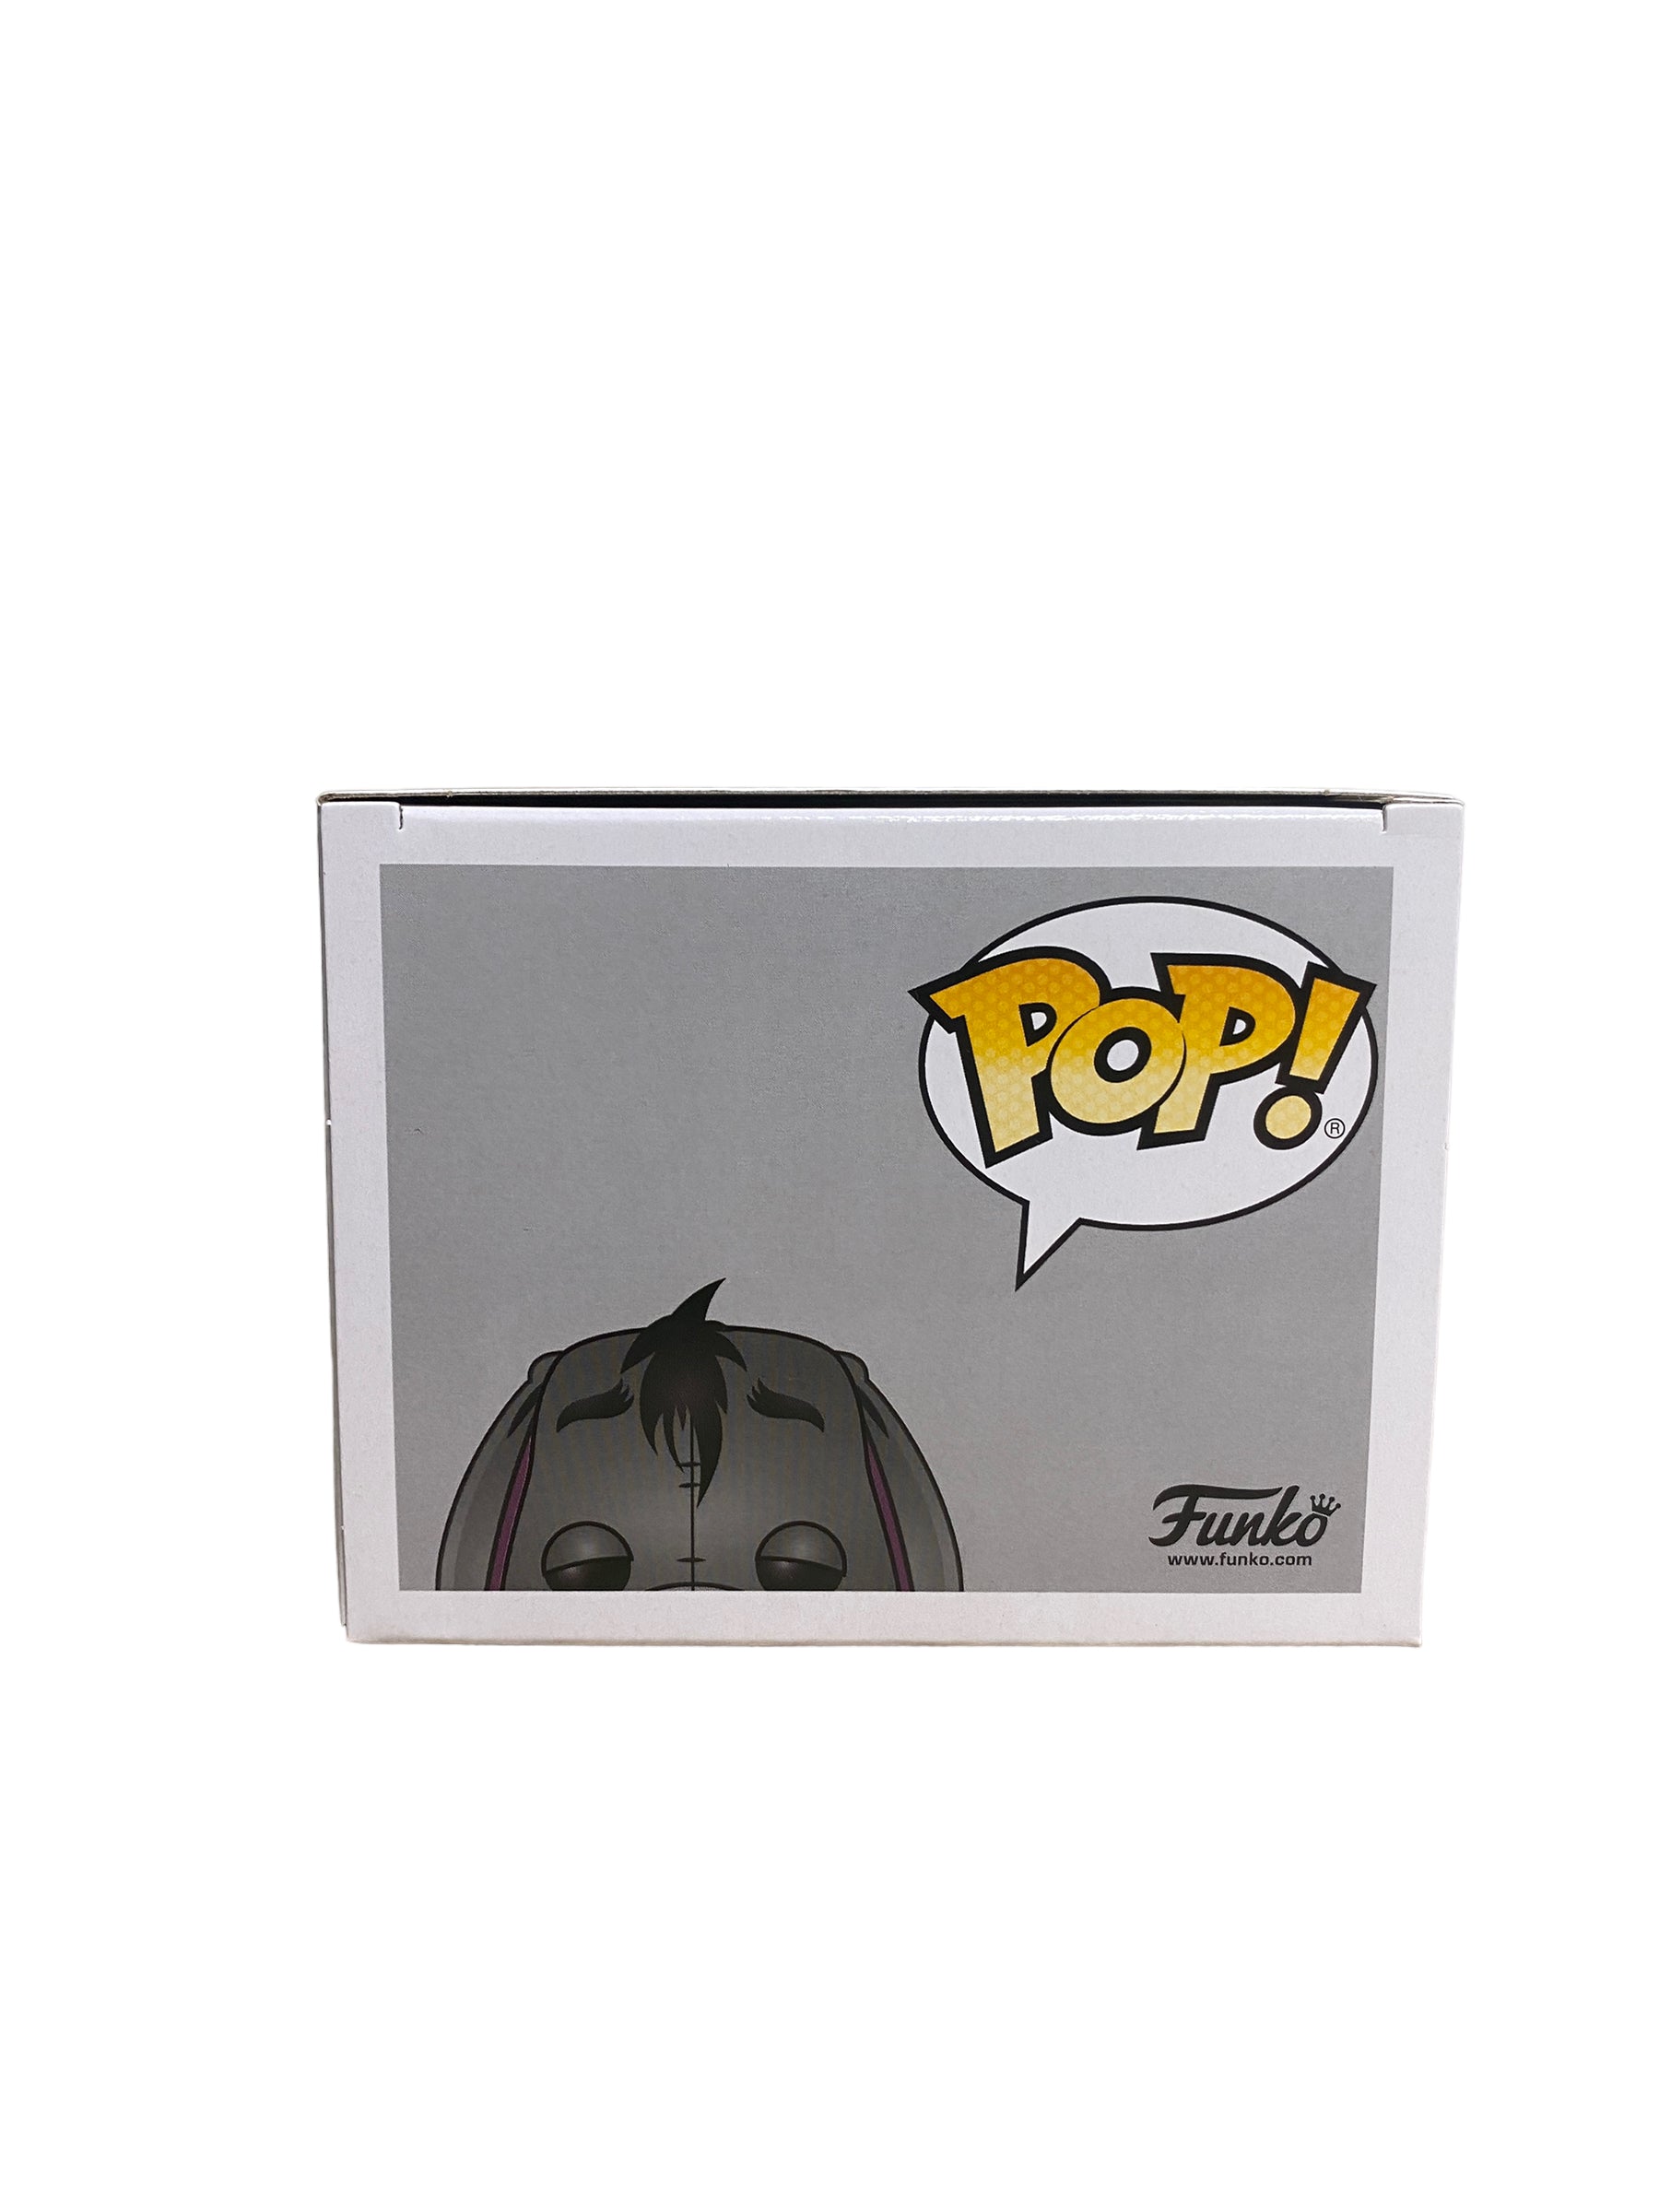 Eeyore #254 (Blue Diamond Chase) Funko Pop! - Winnie the Pooh - Hot Topic Exclusive - Condition 8.75/10